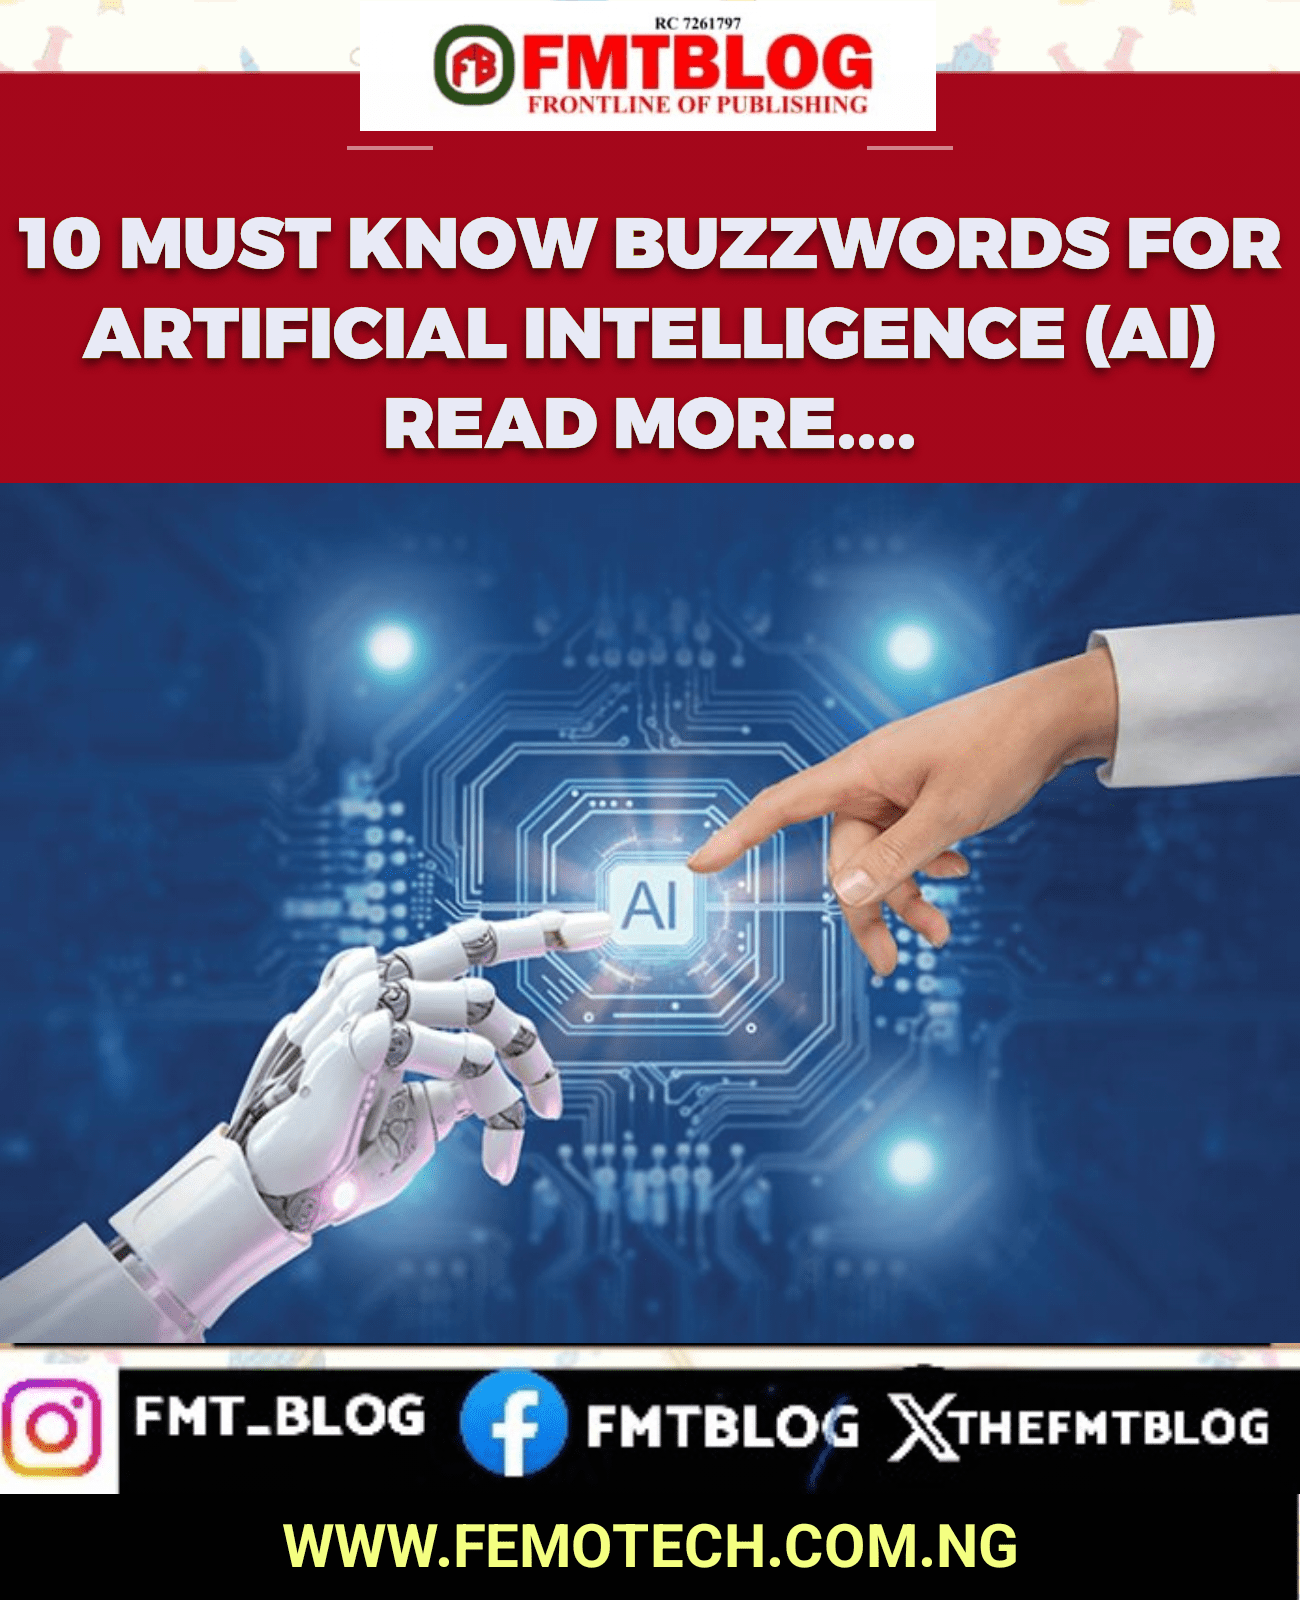 10 Most Know Buzzwords For Artificial Intelligence(AI)